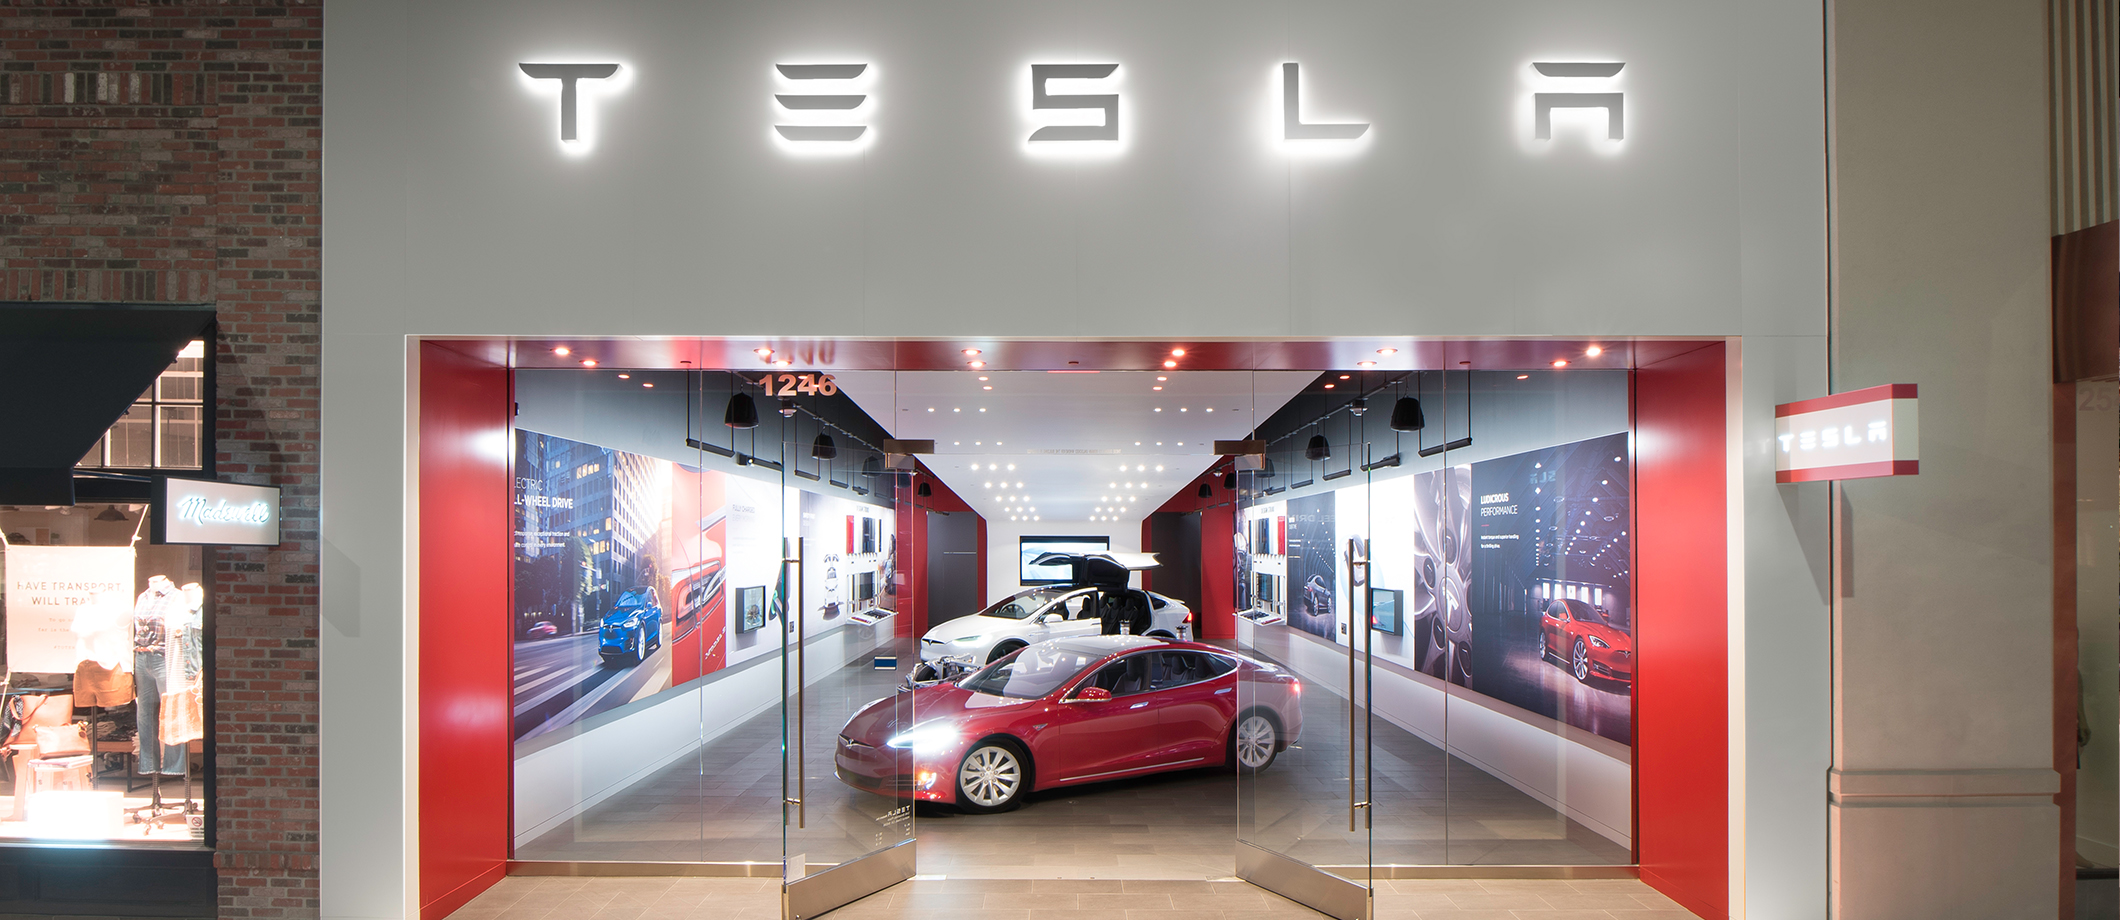 Tesla reverses course, will leave most stores open and raise prices slightly